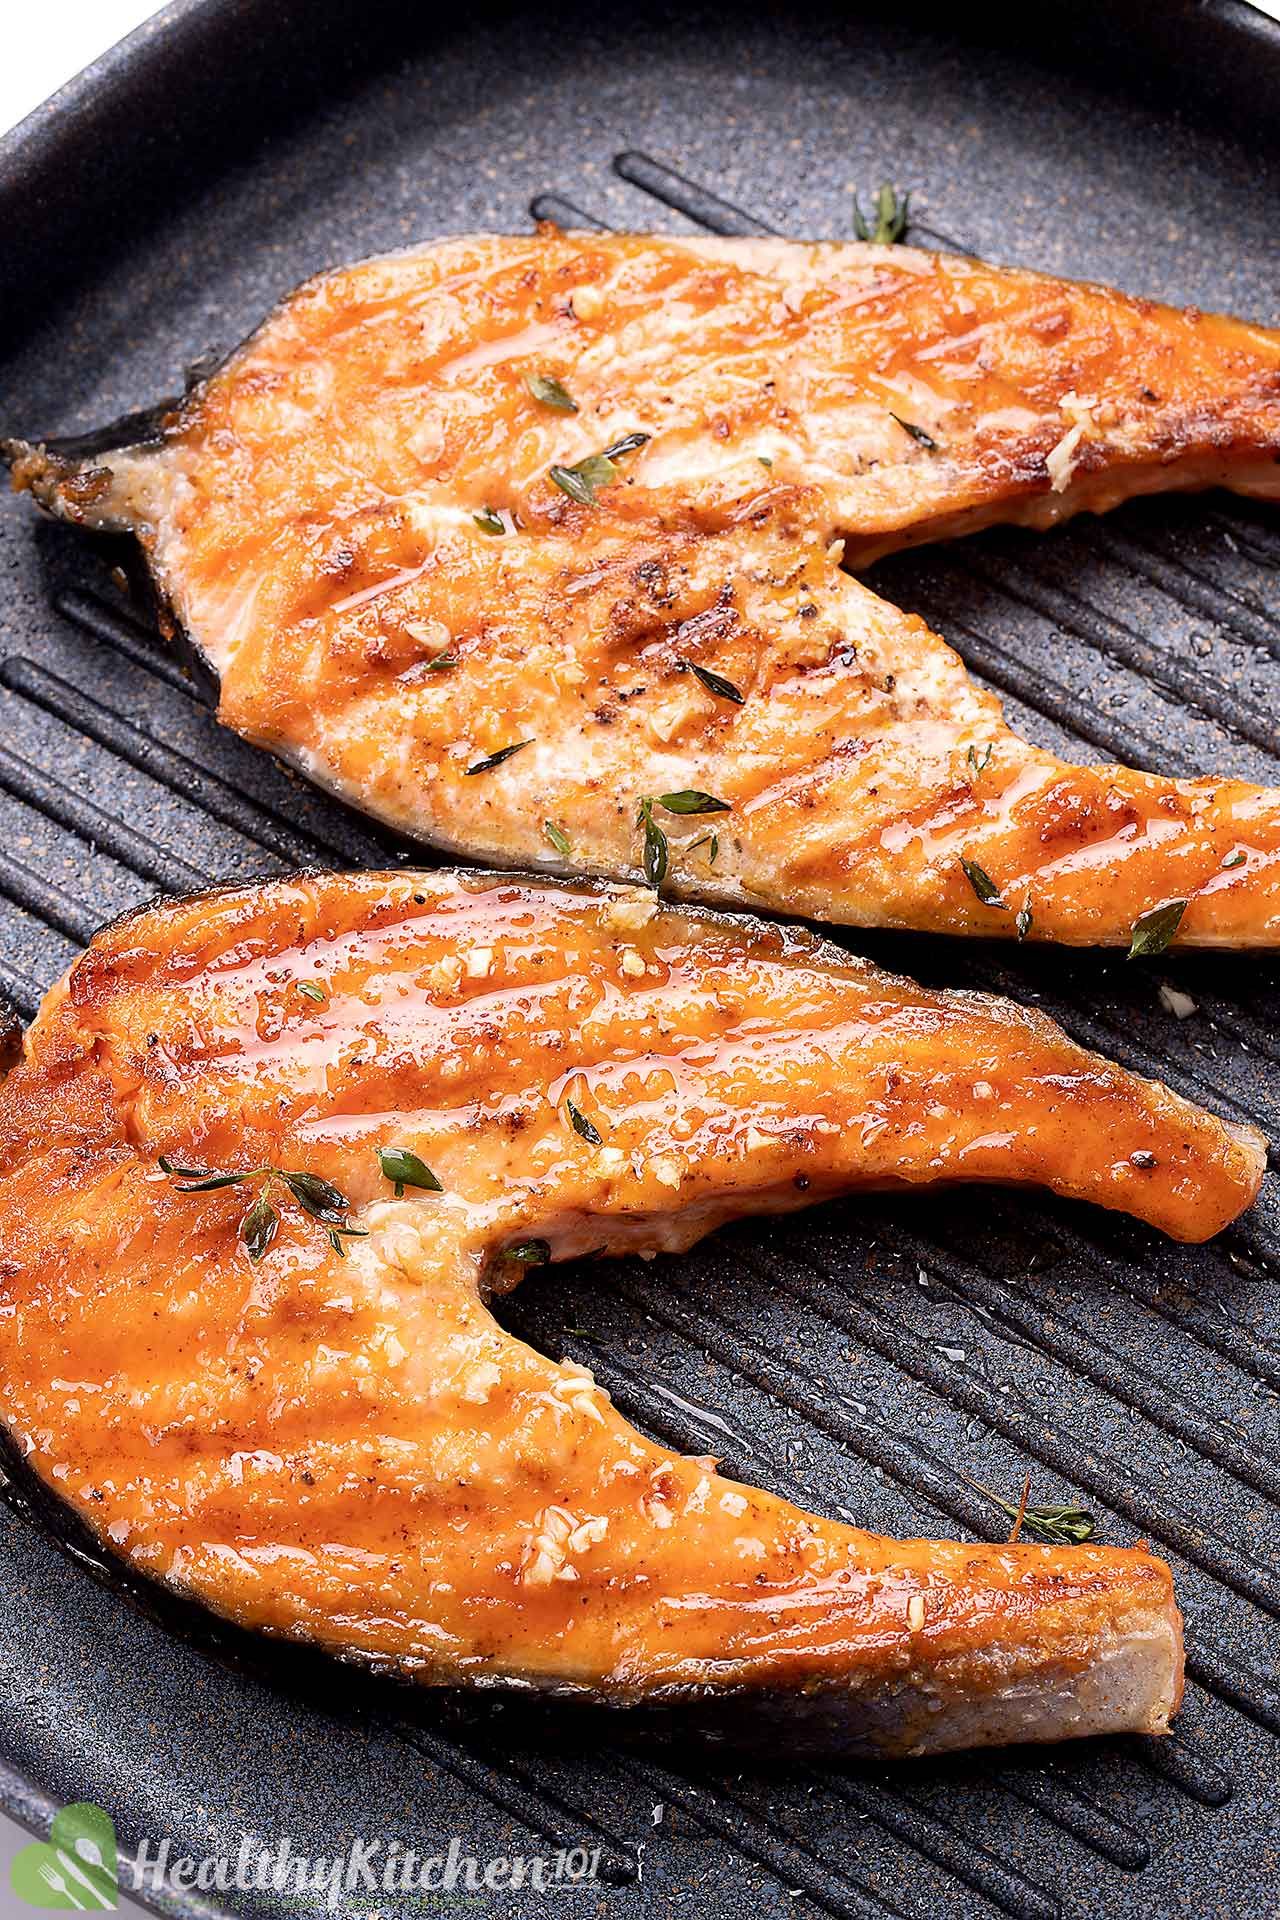 what temperature to cook Salmon Steak